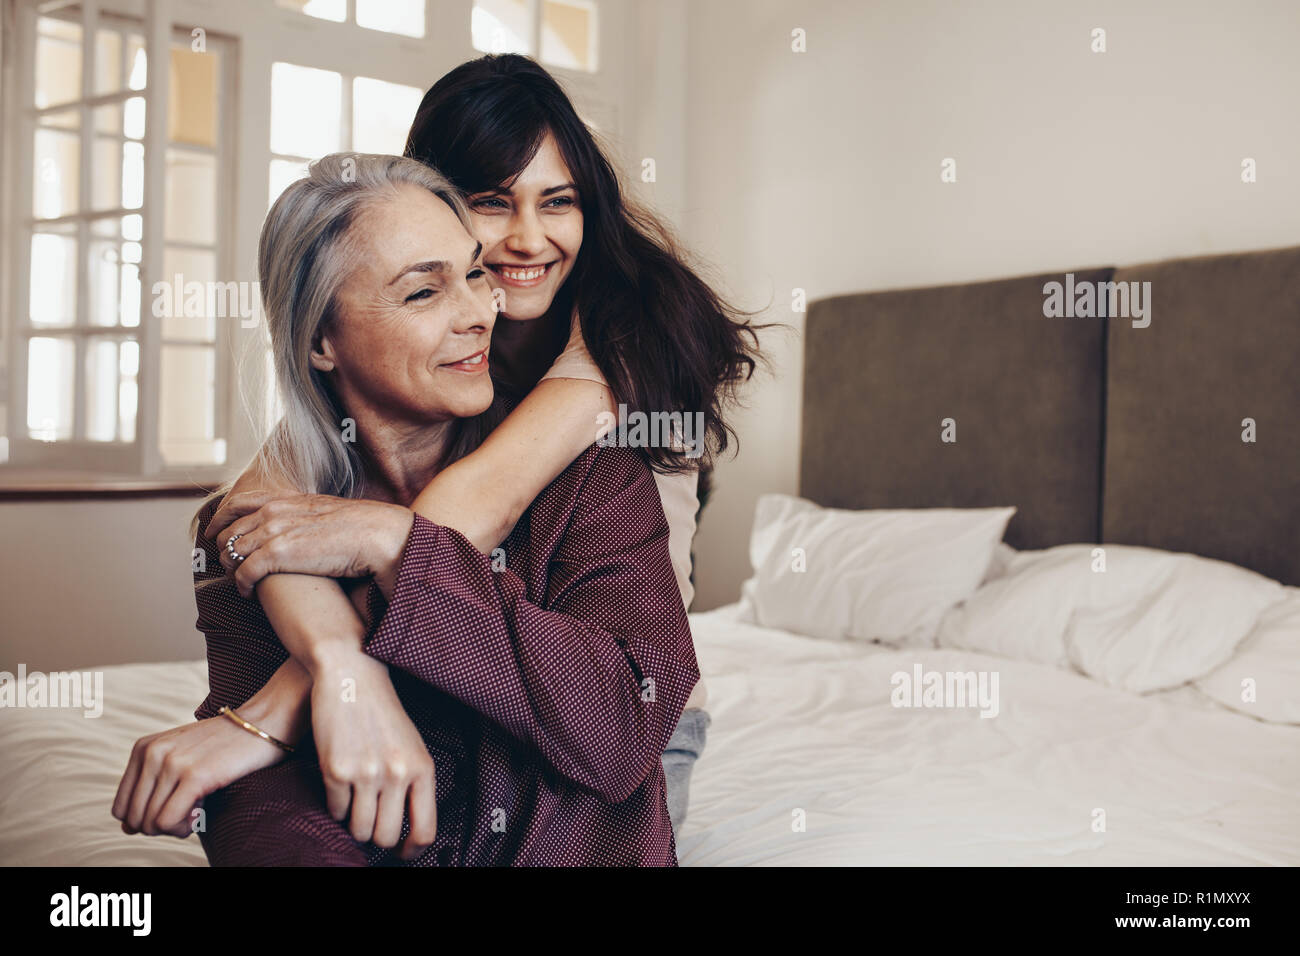 Elderly women sitting on bed with her daughter holding her hands. Smiling mother and daughter sitting at home spending time together. Stock Photo